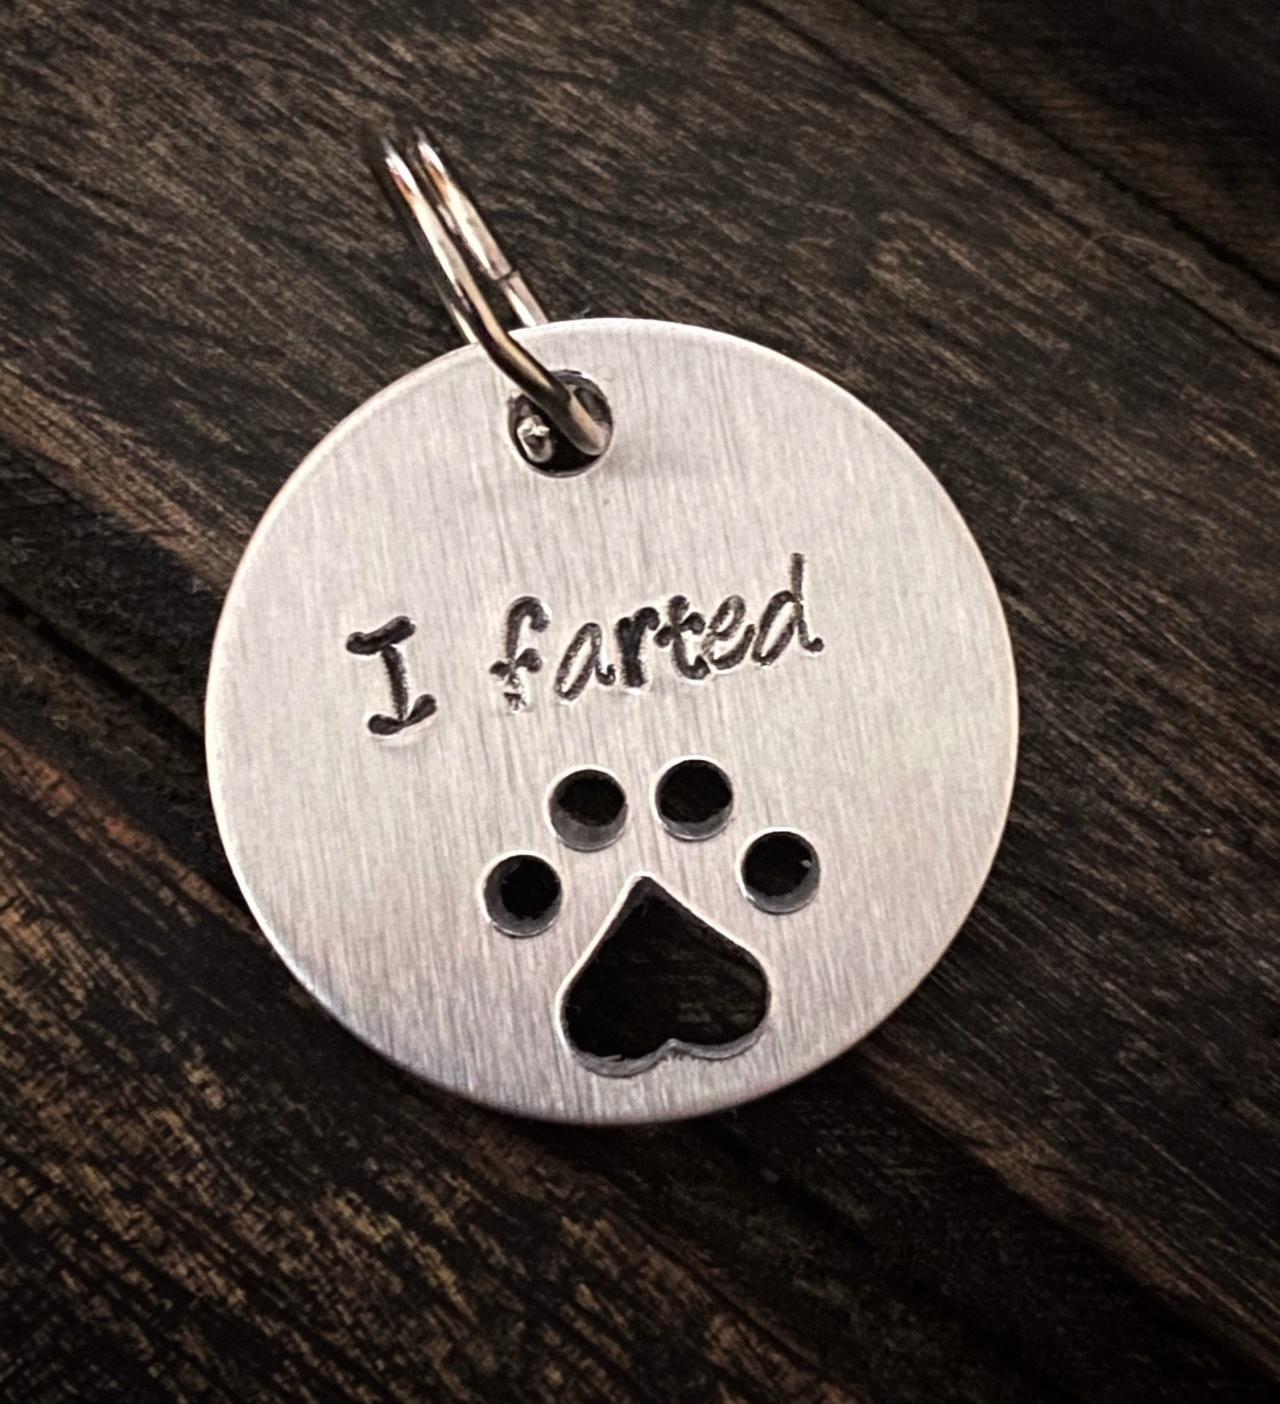 DOG OR CAT Tag, “I Farted” tag, Hand Stamped, Collar tag, fun tag for pets